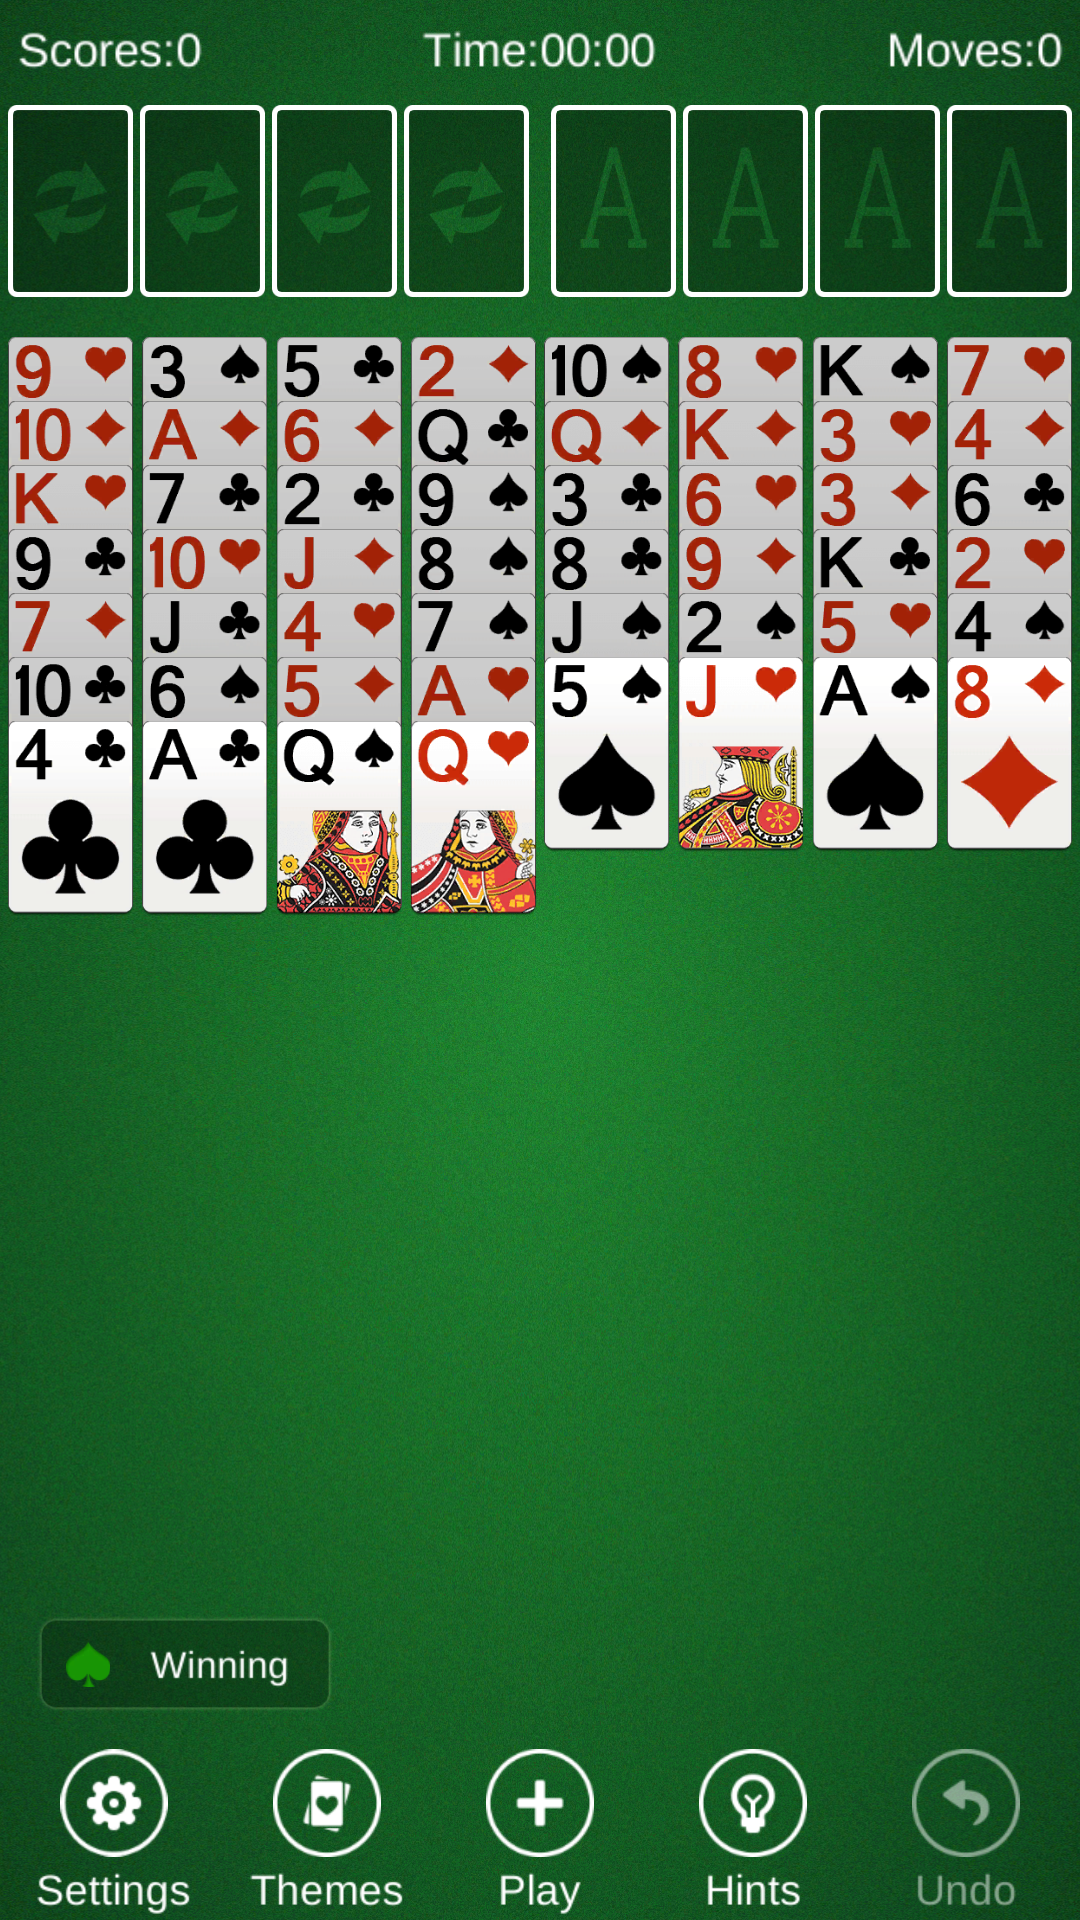 Play FreeCell Solitaire Online